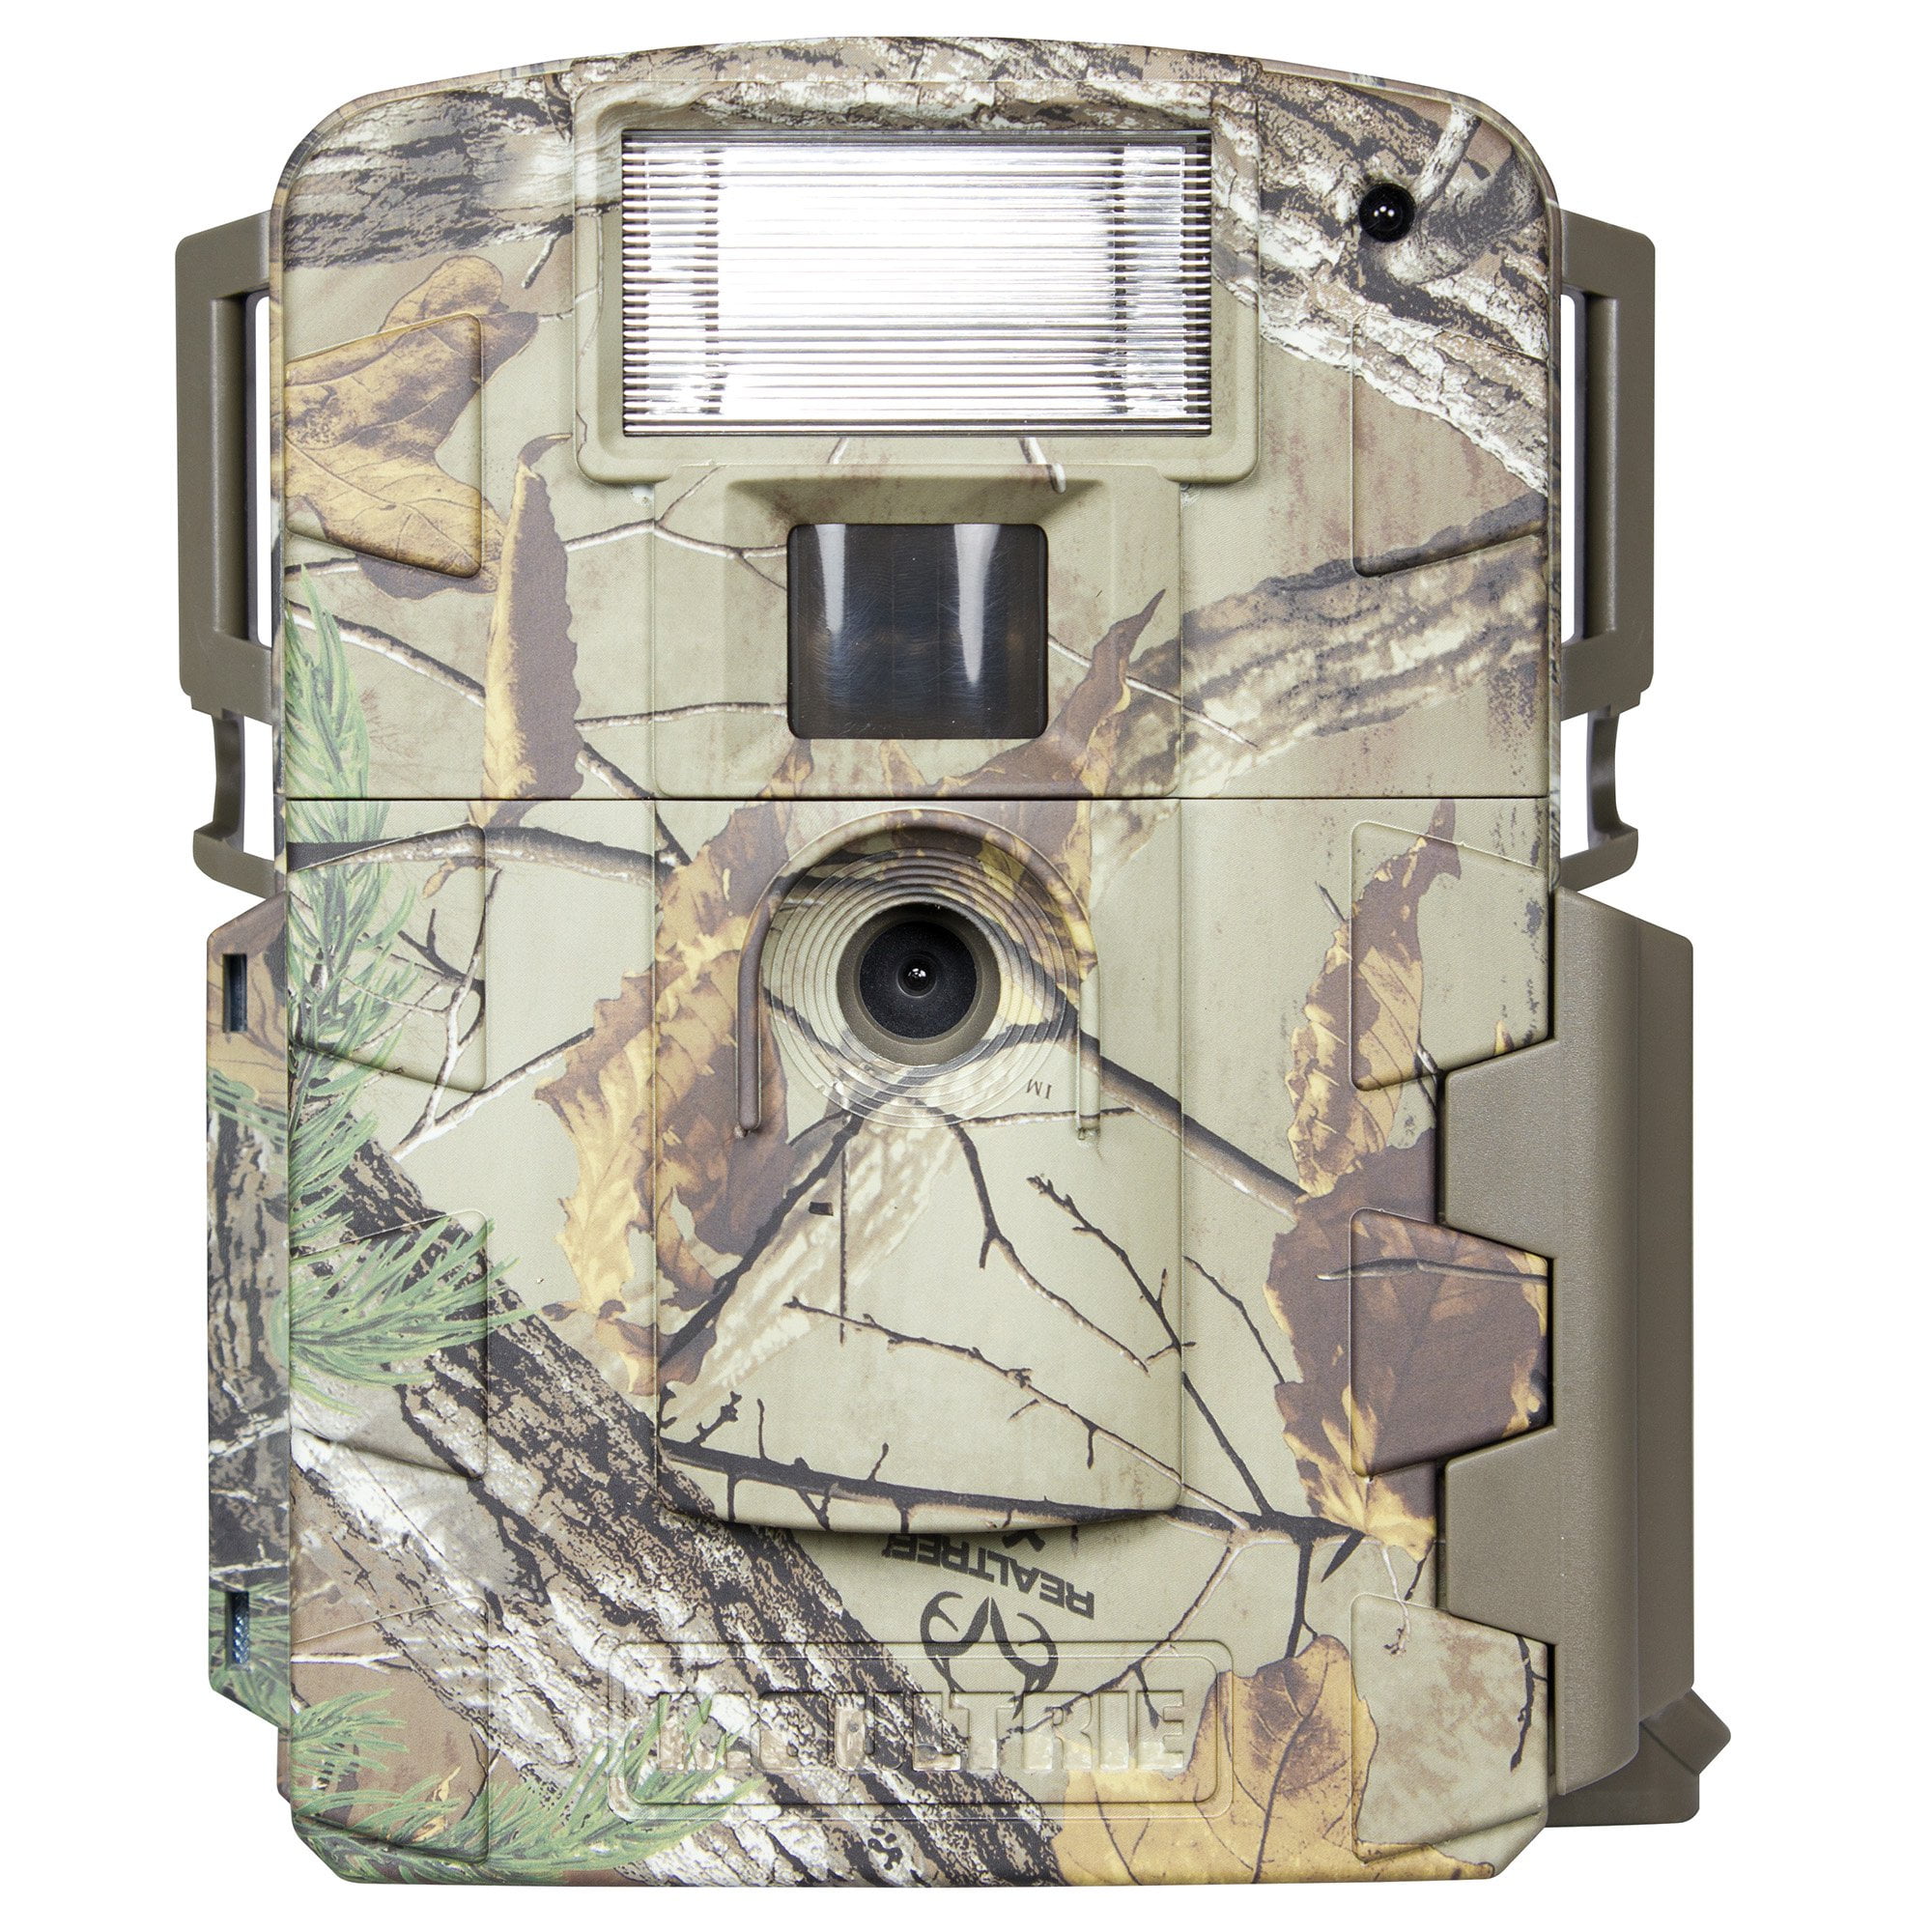 New Moultrie A-700 Scouting Trail Cam Deer Security Camera 14MP MCG-13334 